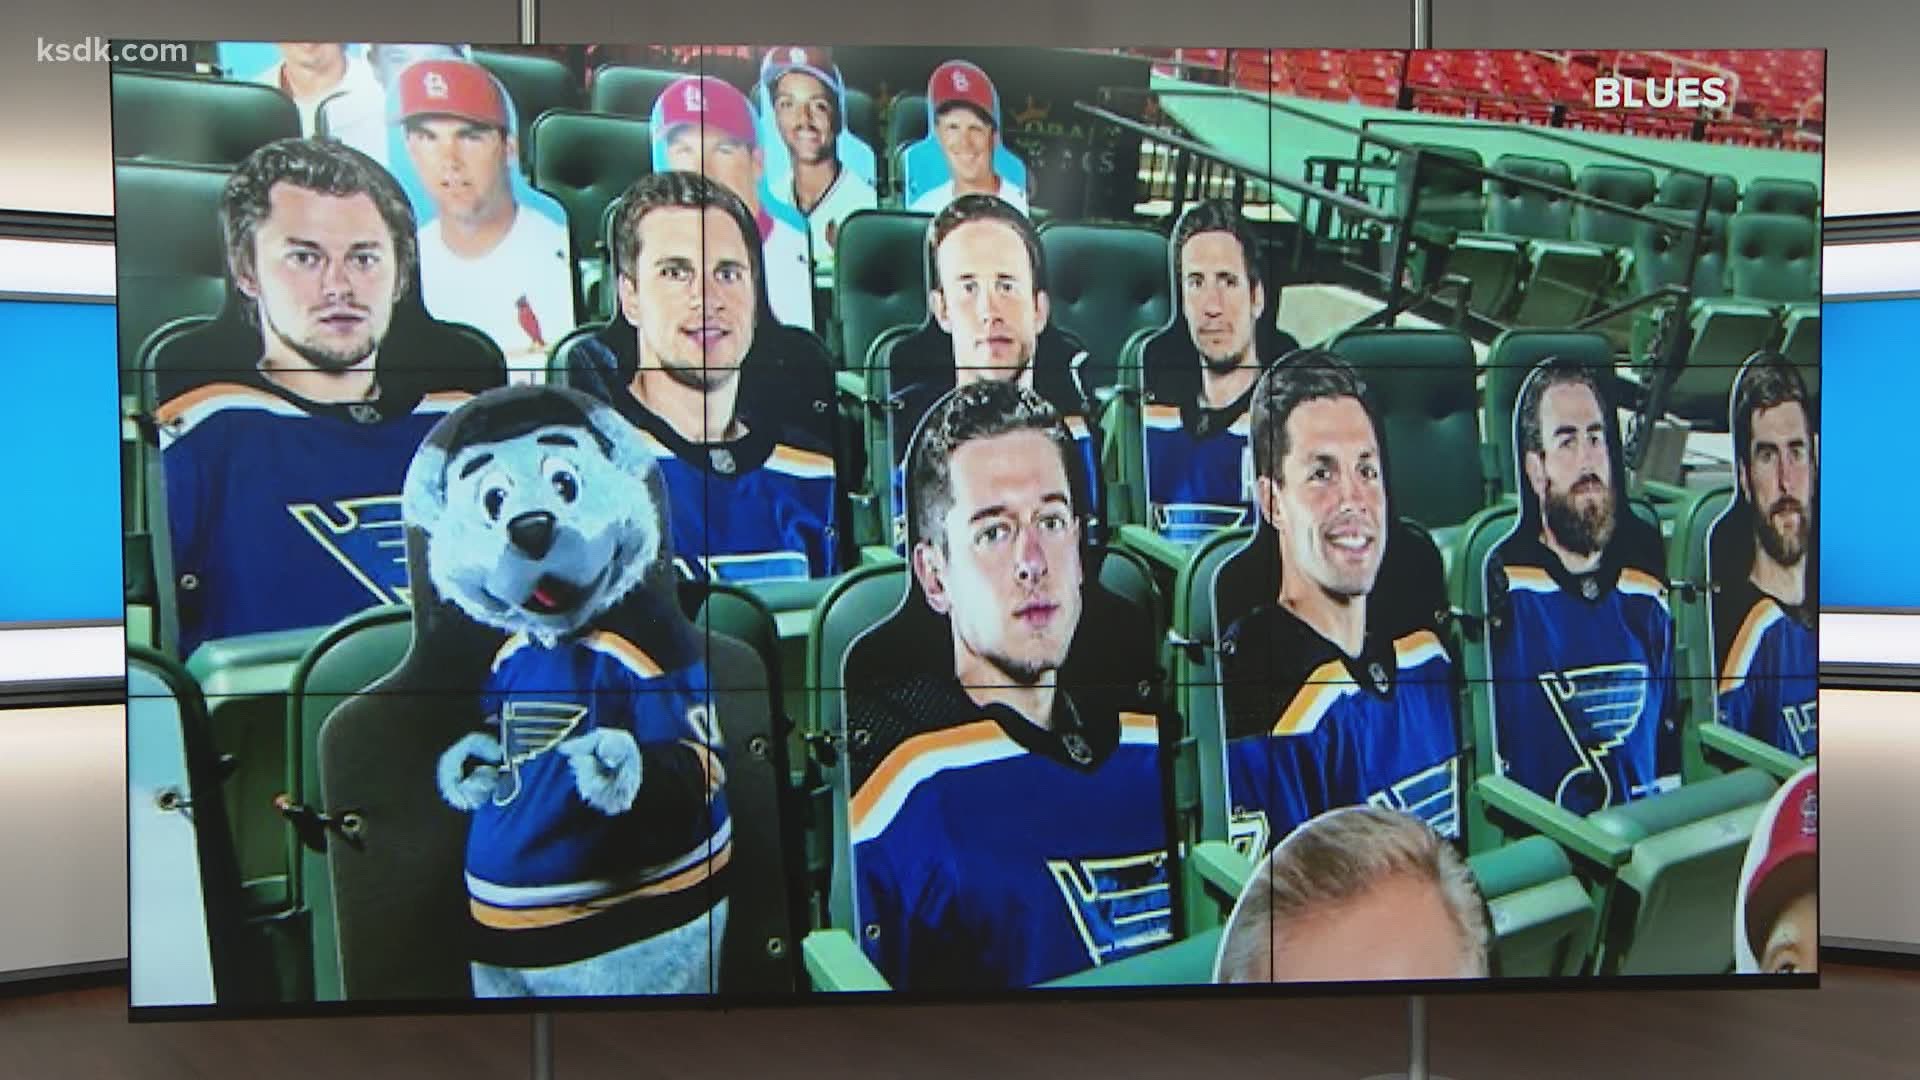 The Cardinals announced fans could buy cardboard cutouts of themselves to sit in the stands - and our Stanley Cup champs didn't want to miss out.